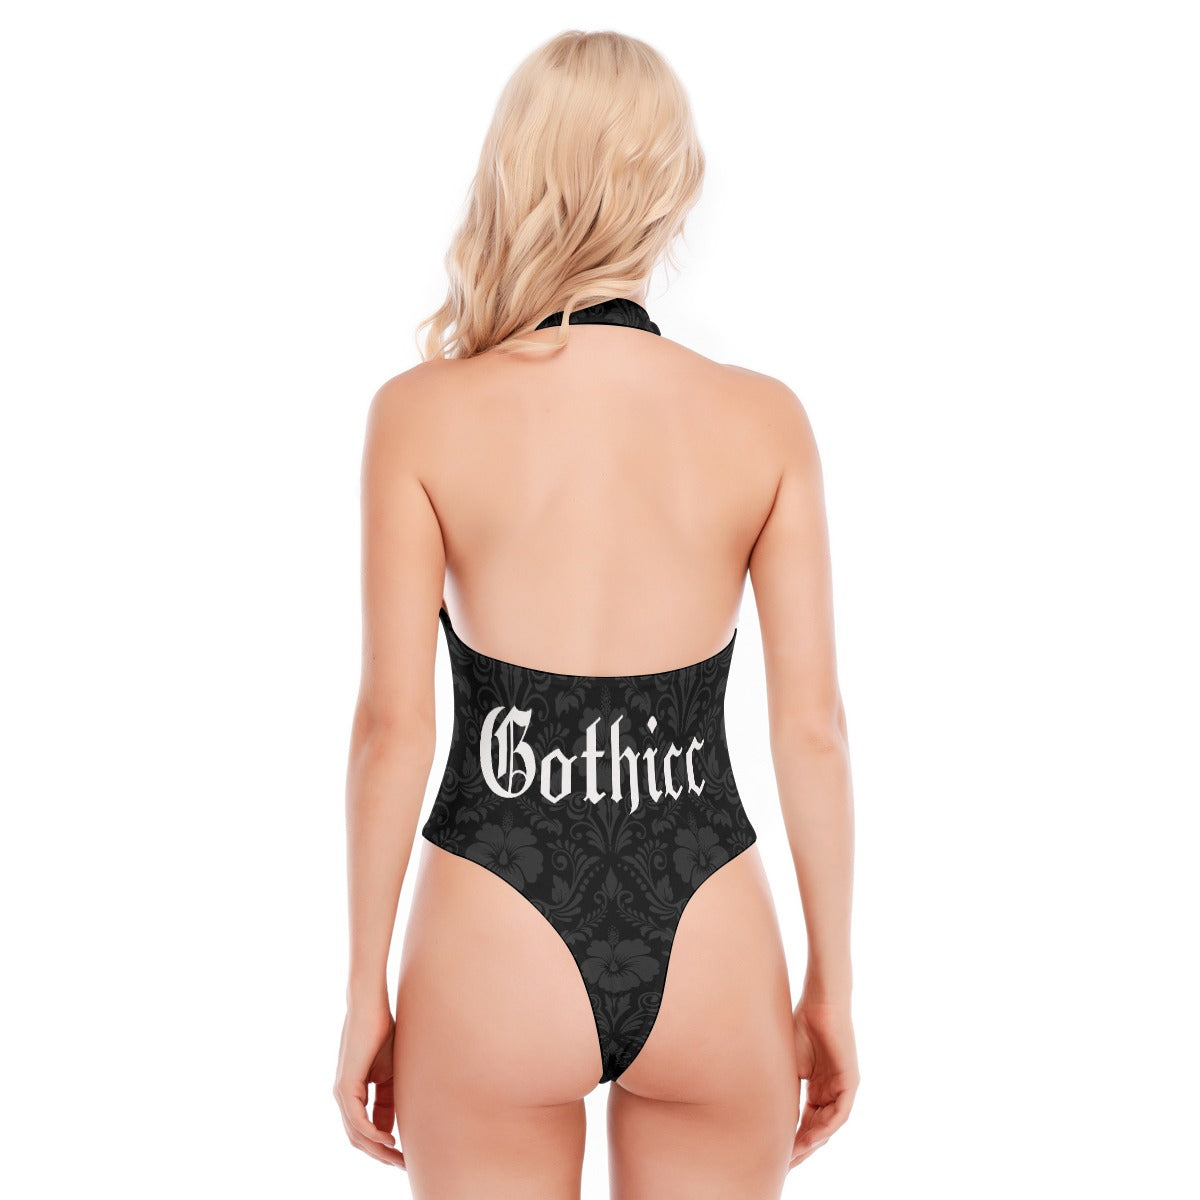 Gothicc Backless Bodysuit